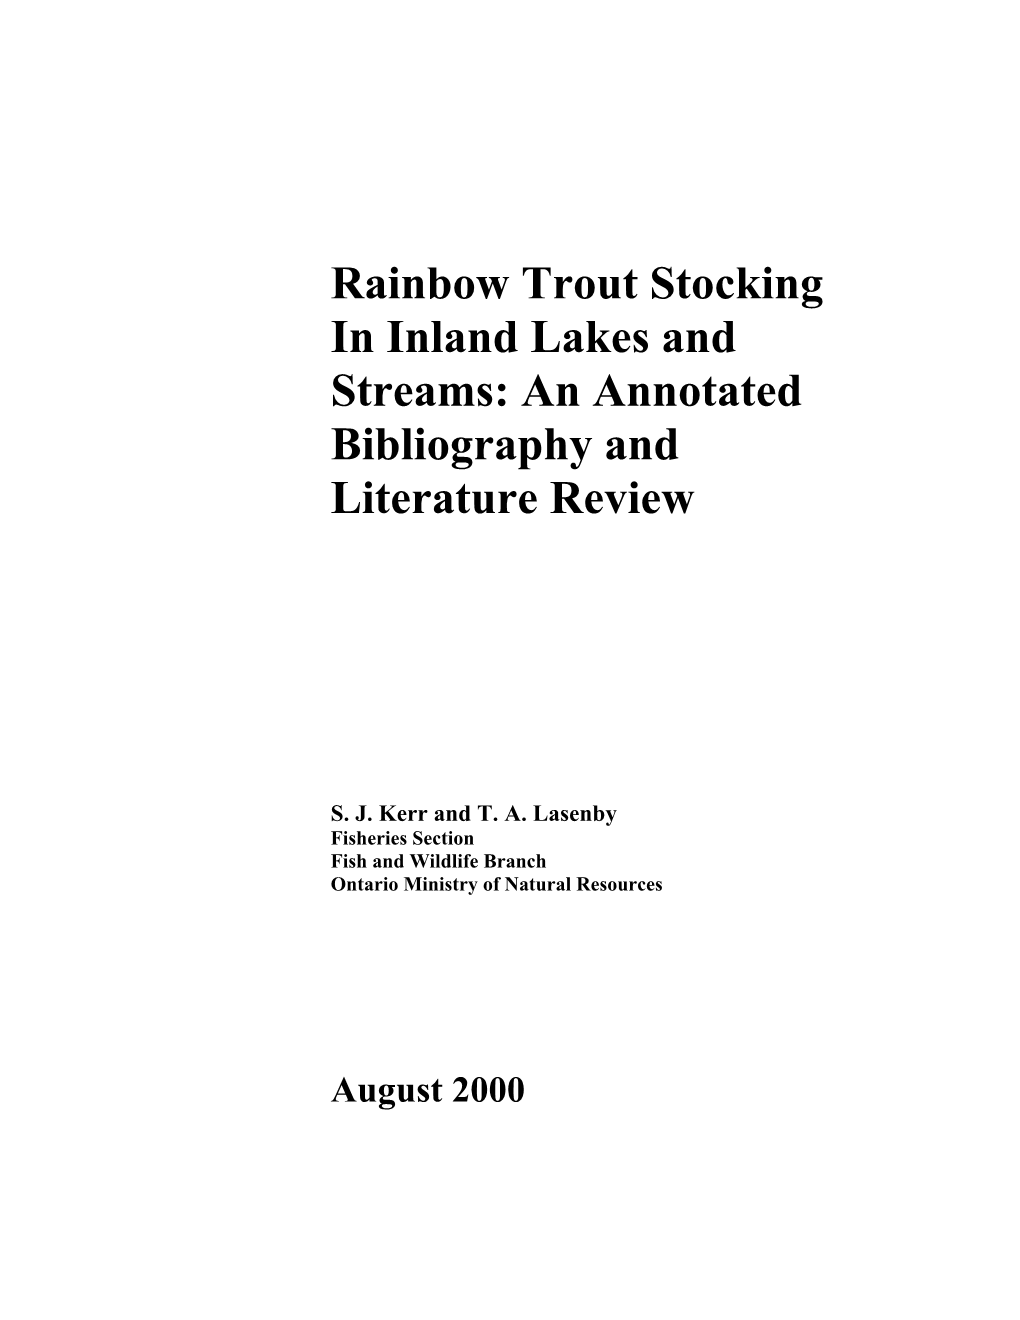 Rainbow Trout Stocking in Inland Lakes and Streams: an Annotated Bibliography and Literature Review